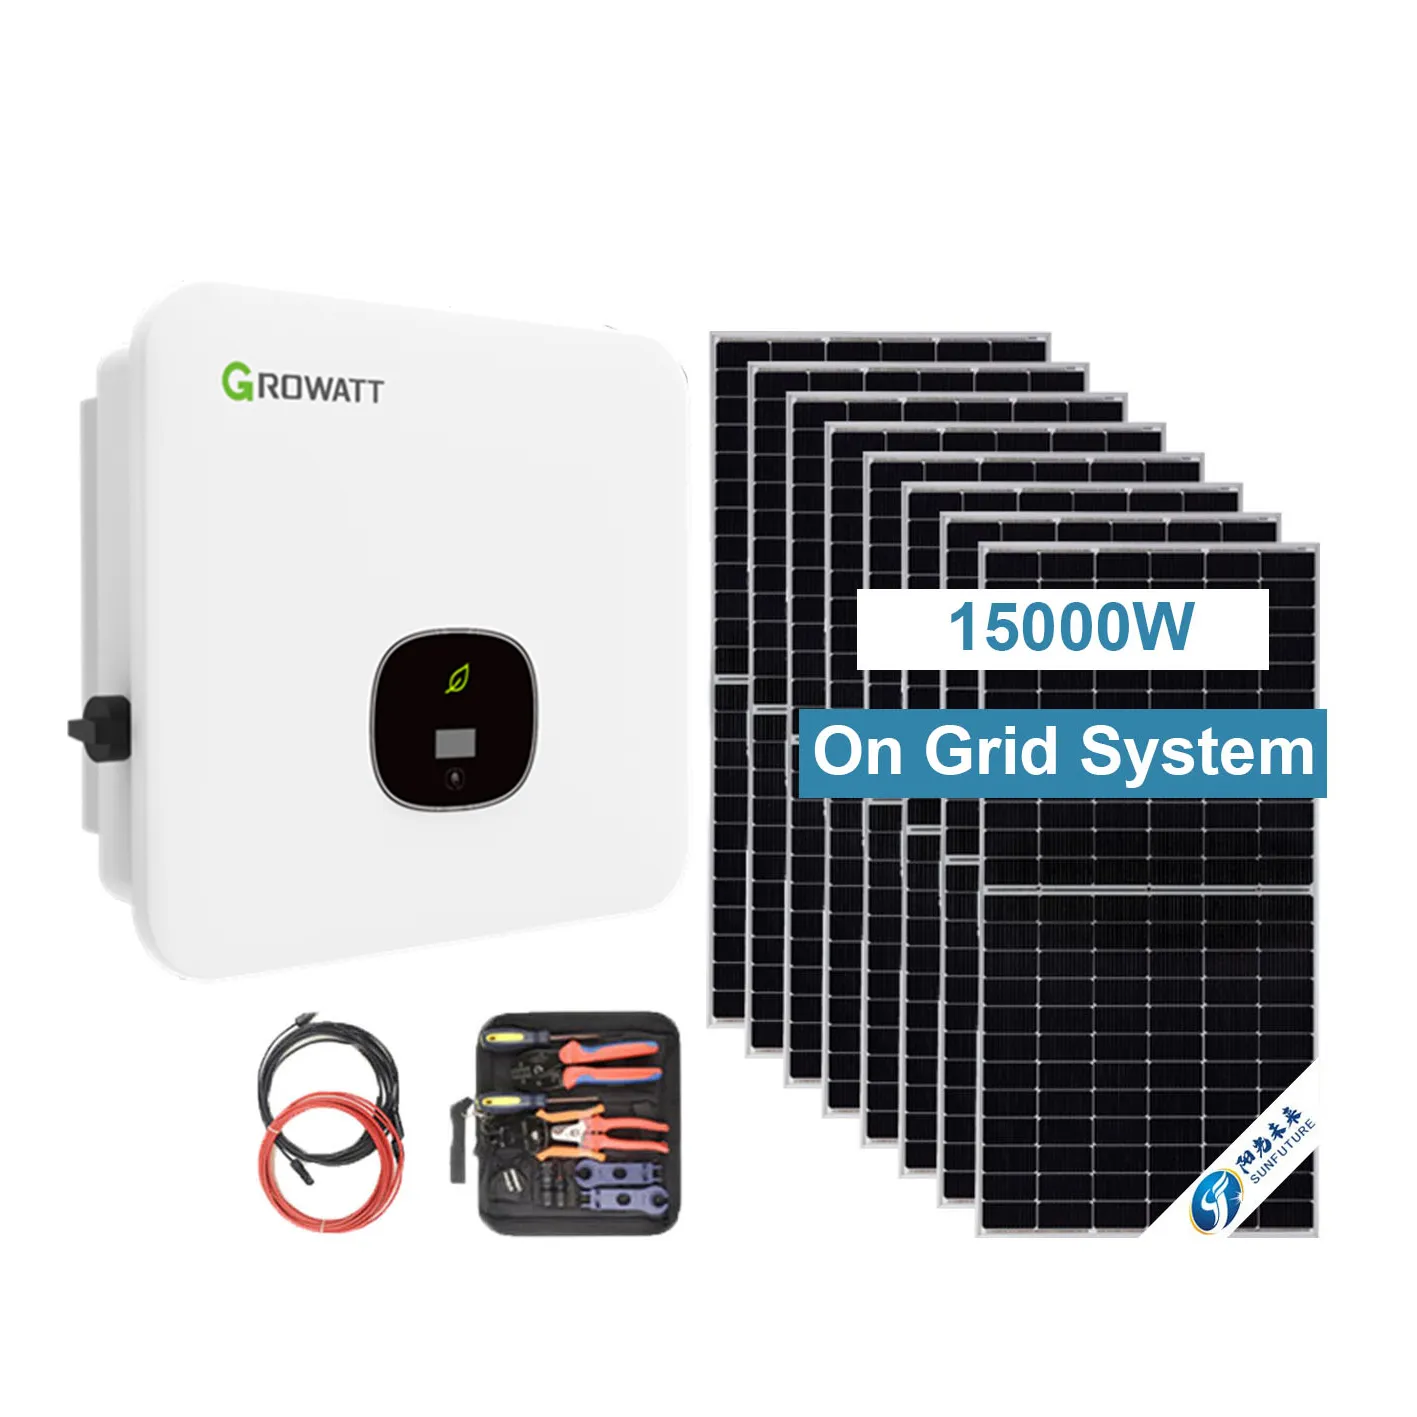 SUNFUTURE On Grid Inverters 15Kw Home Appliance Energia Solare 10KW 20KW 30KW Other Solar Energy Related Products System